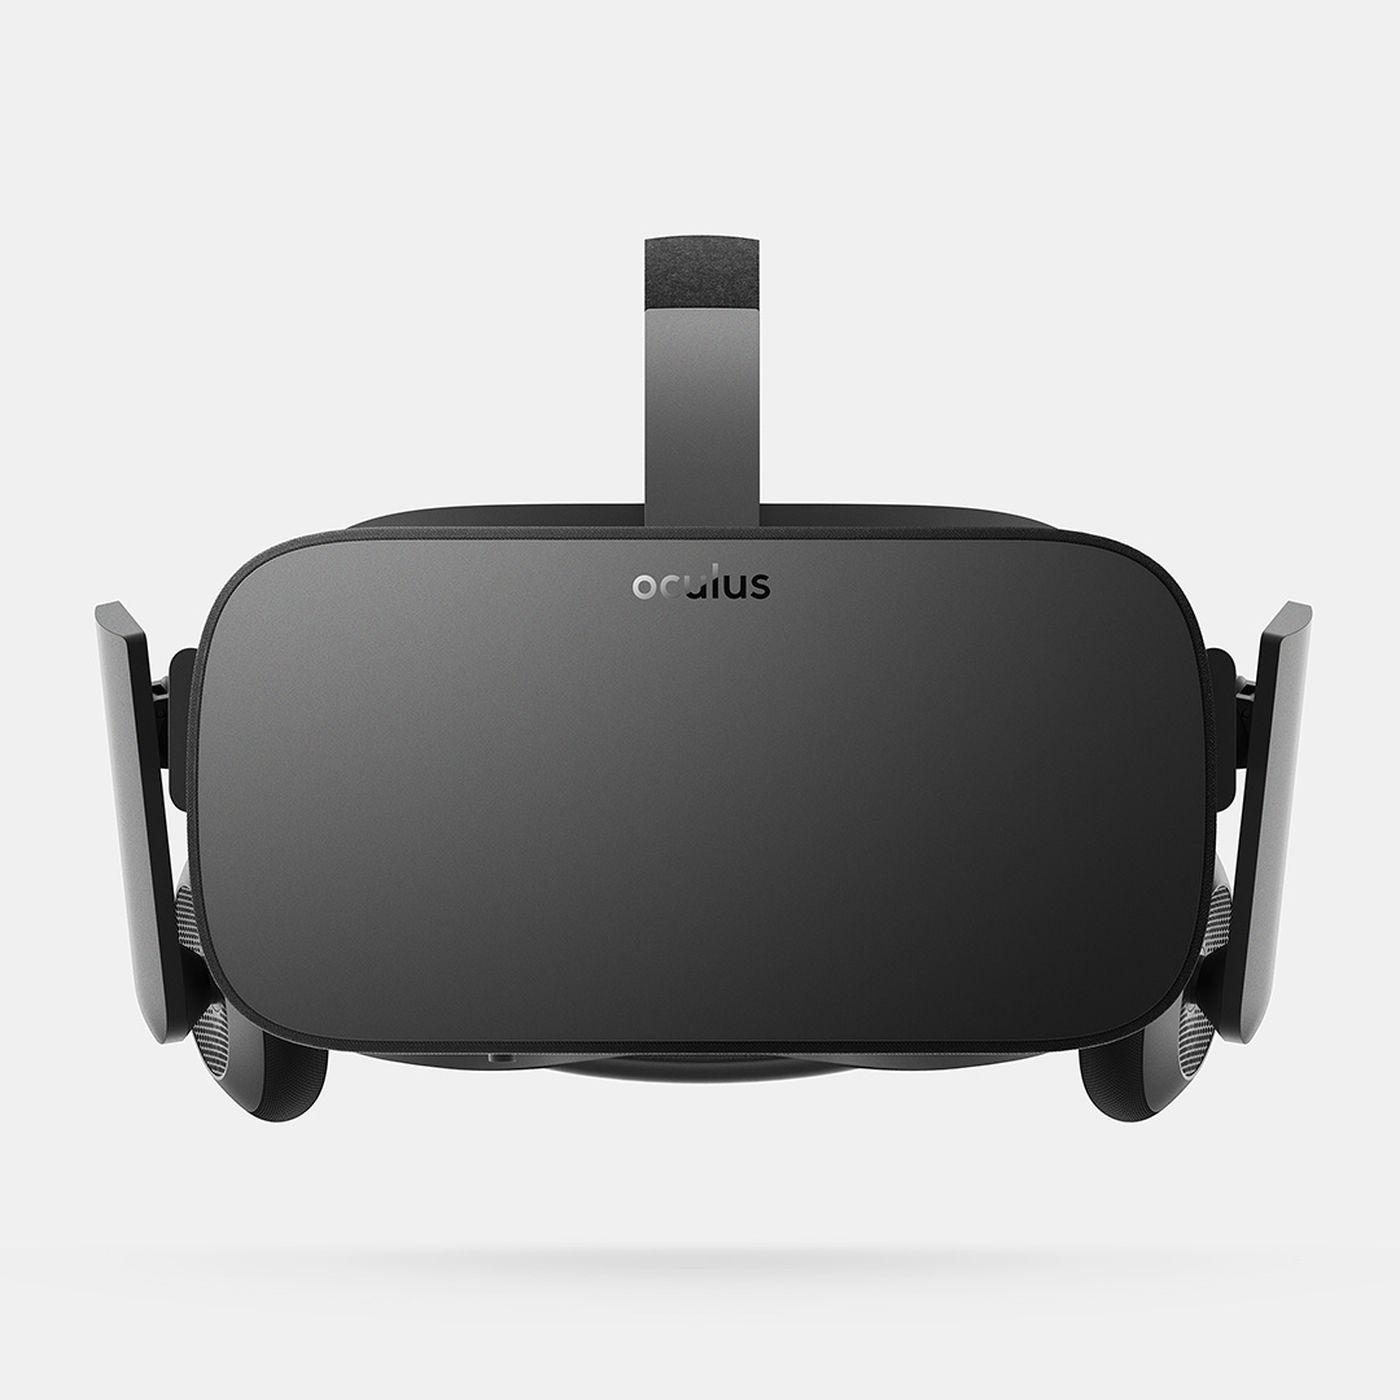 Sprout foredrag Rise Oculus Rift price set at $599, shipping in March (update) - Polygon